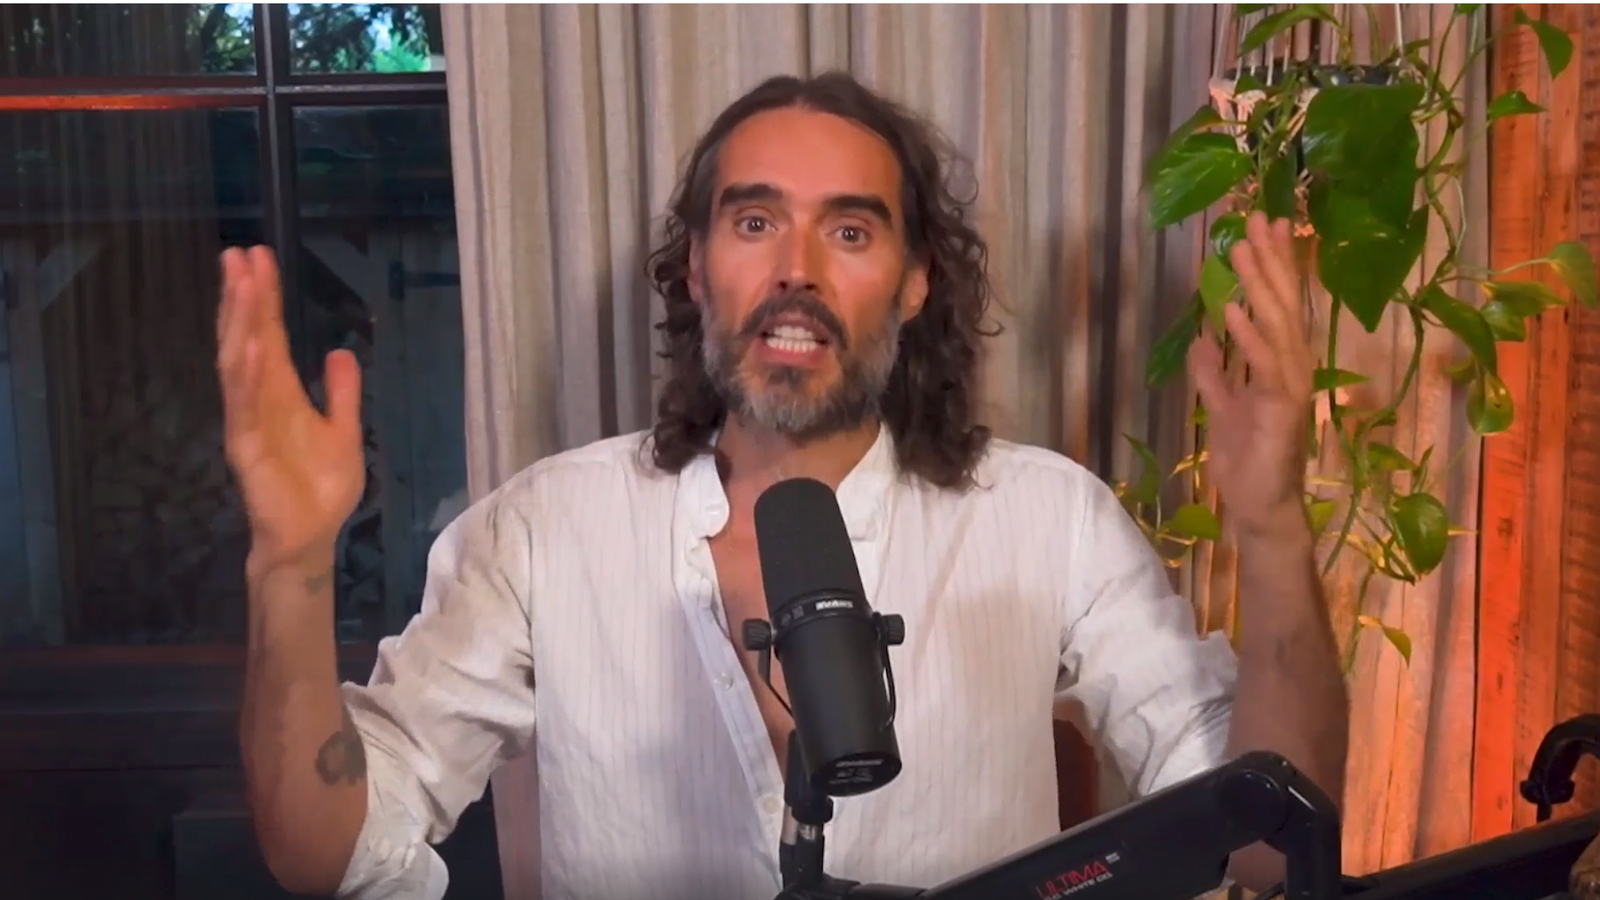 Russell Brand accuses government of bypassing judicial process to censor him on social media